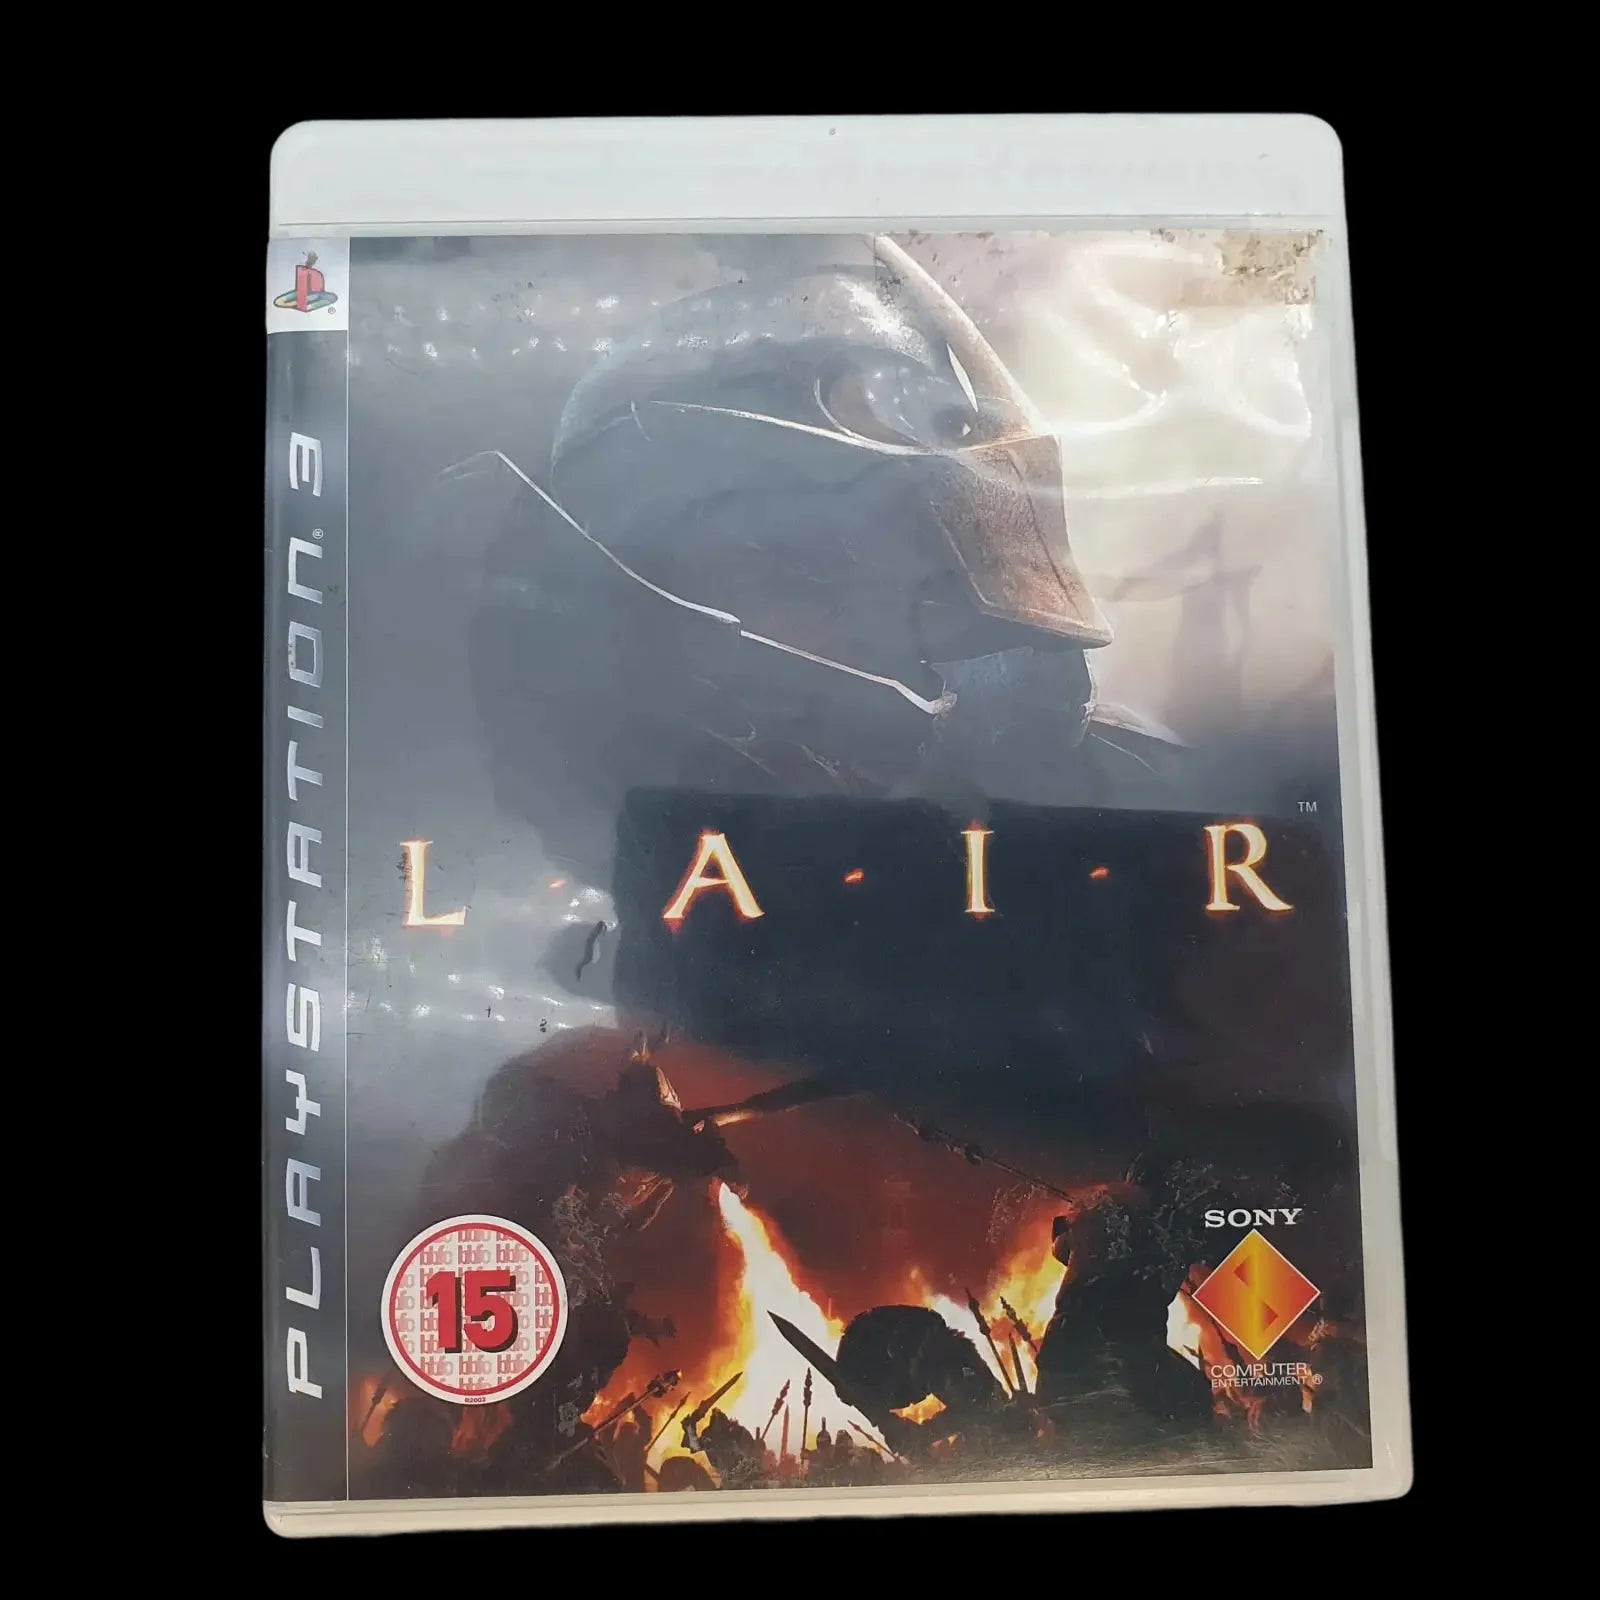 Lair Sony Playstation 3 Factor 5 2007 Video Game Cib